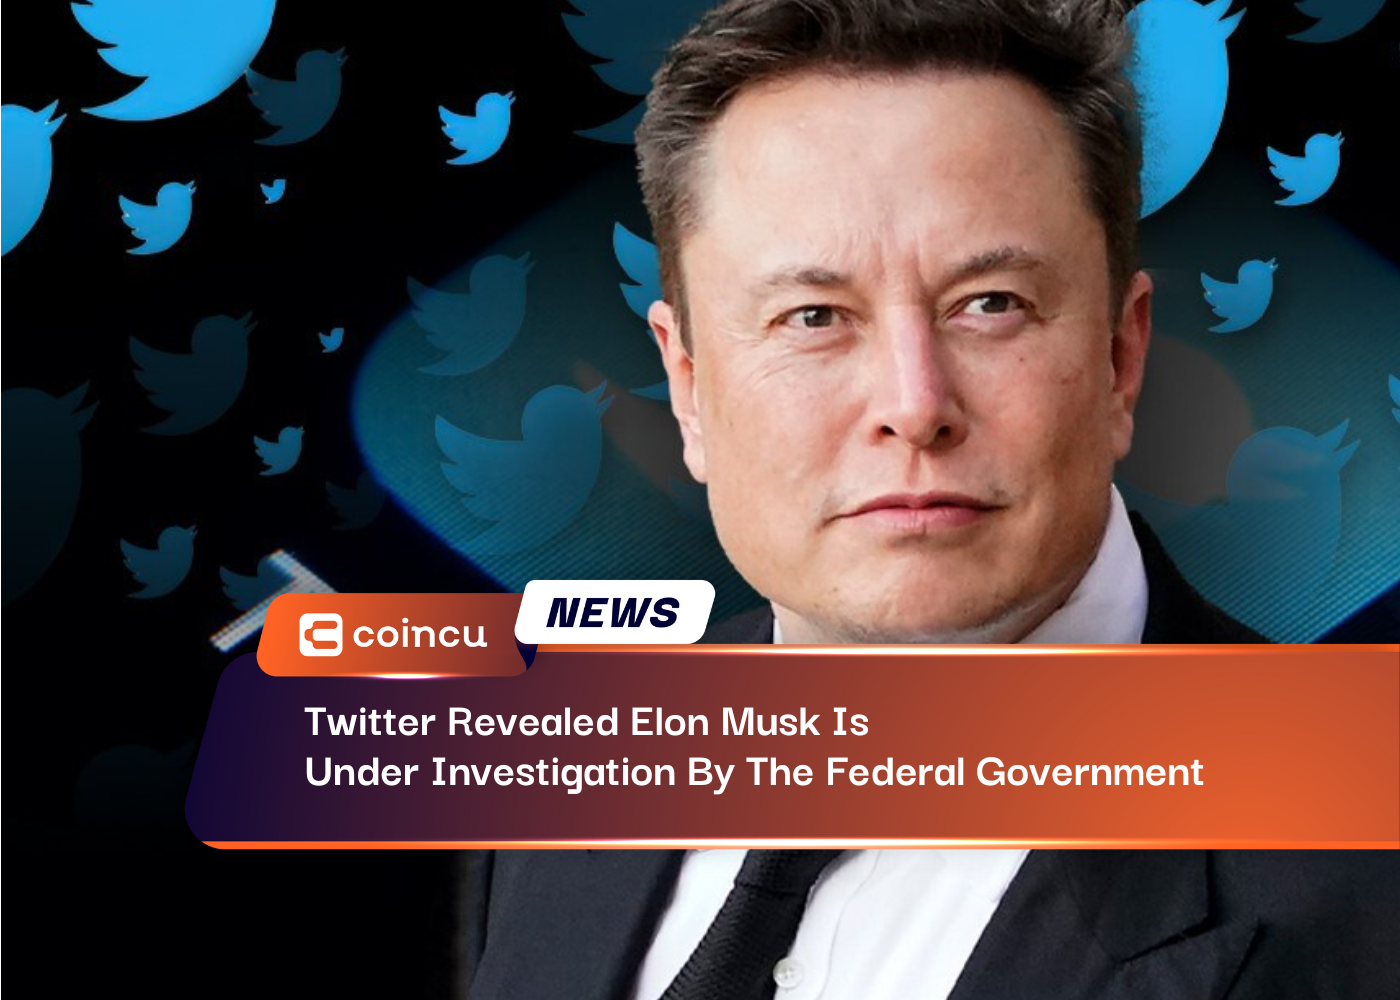 Twitter Revealed Elon Musk Is Under Investigation By The Federal Government